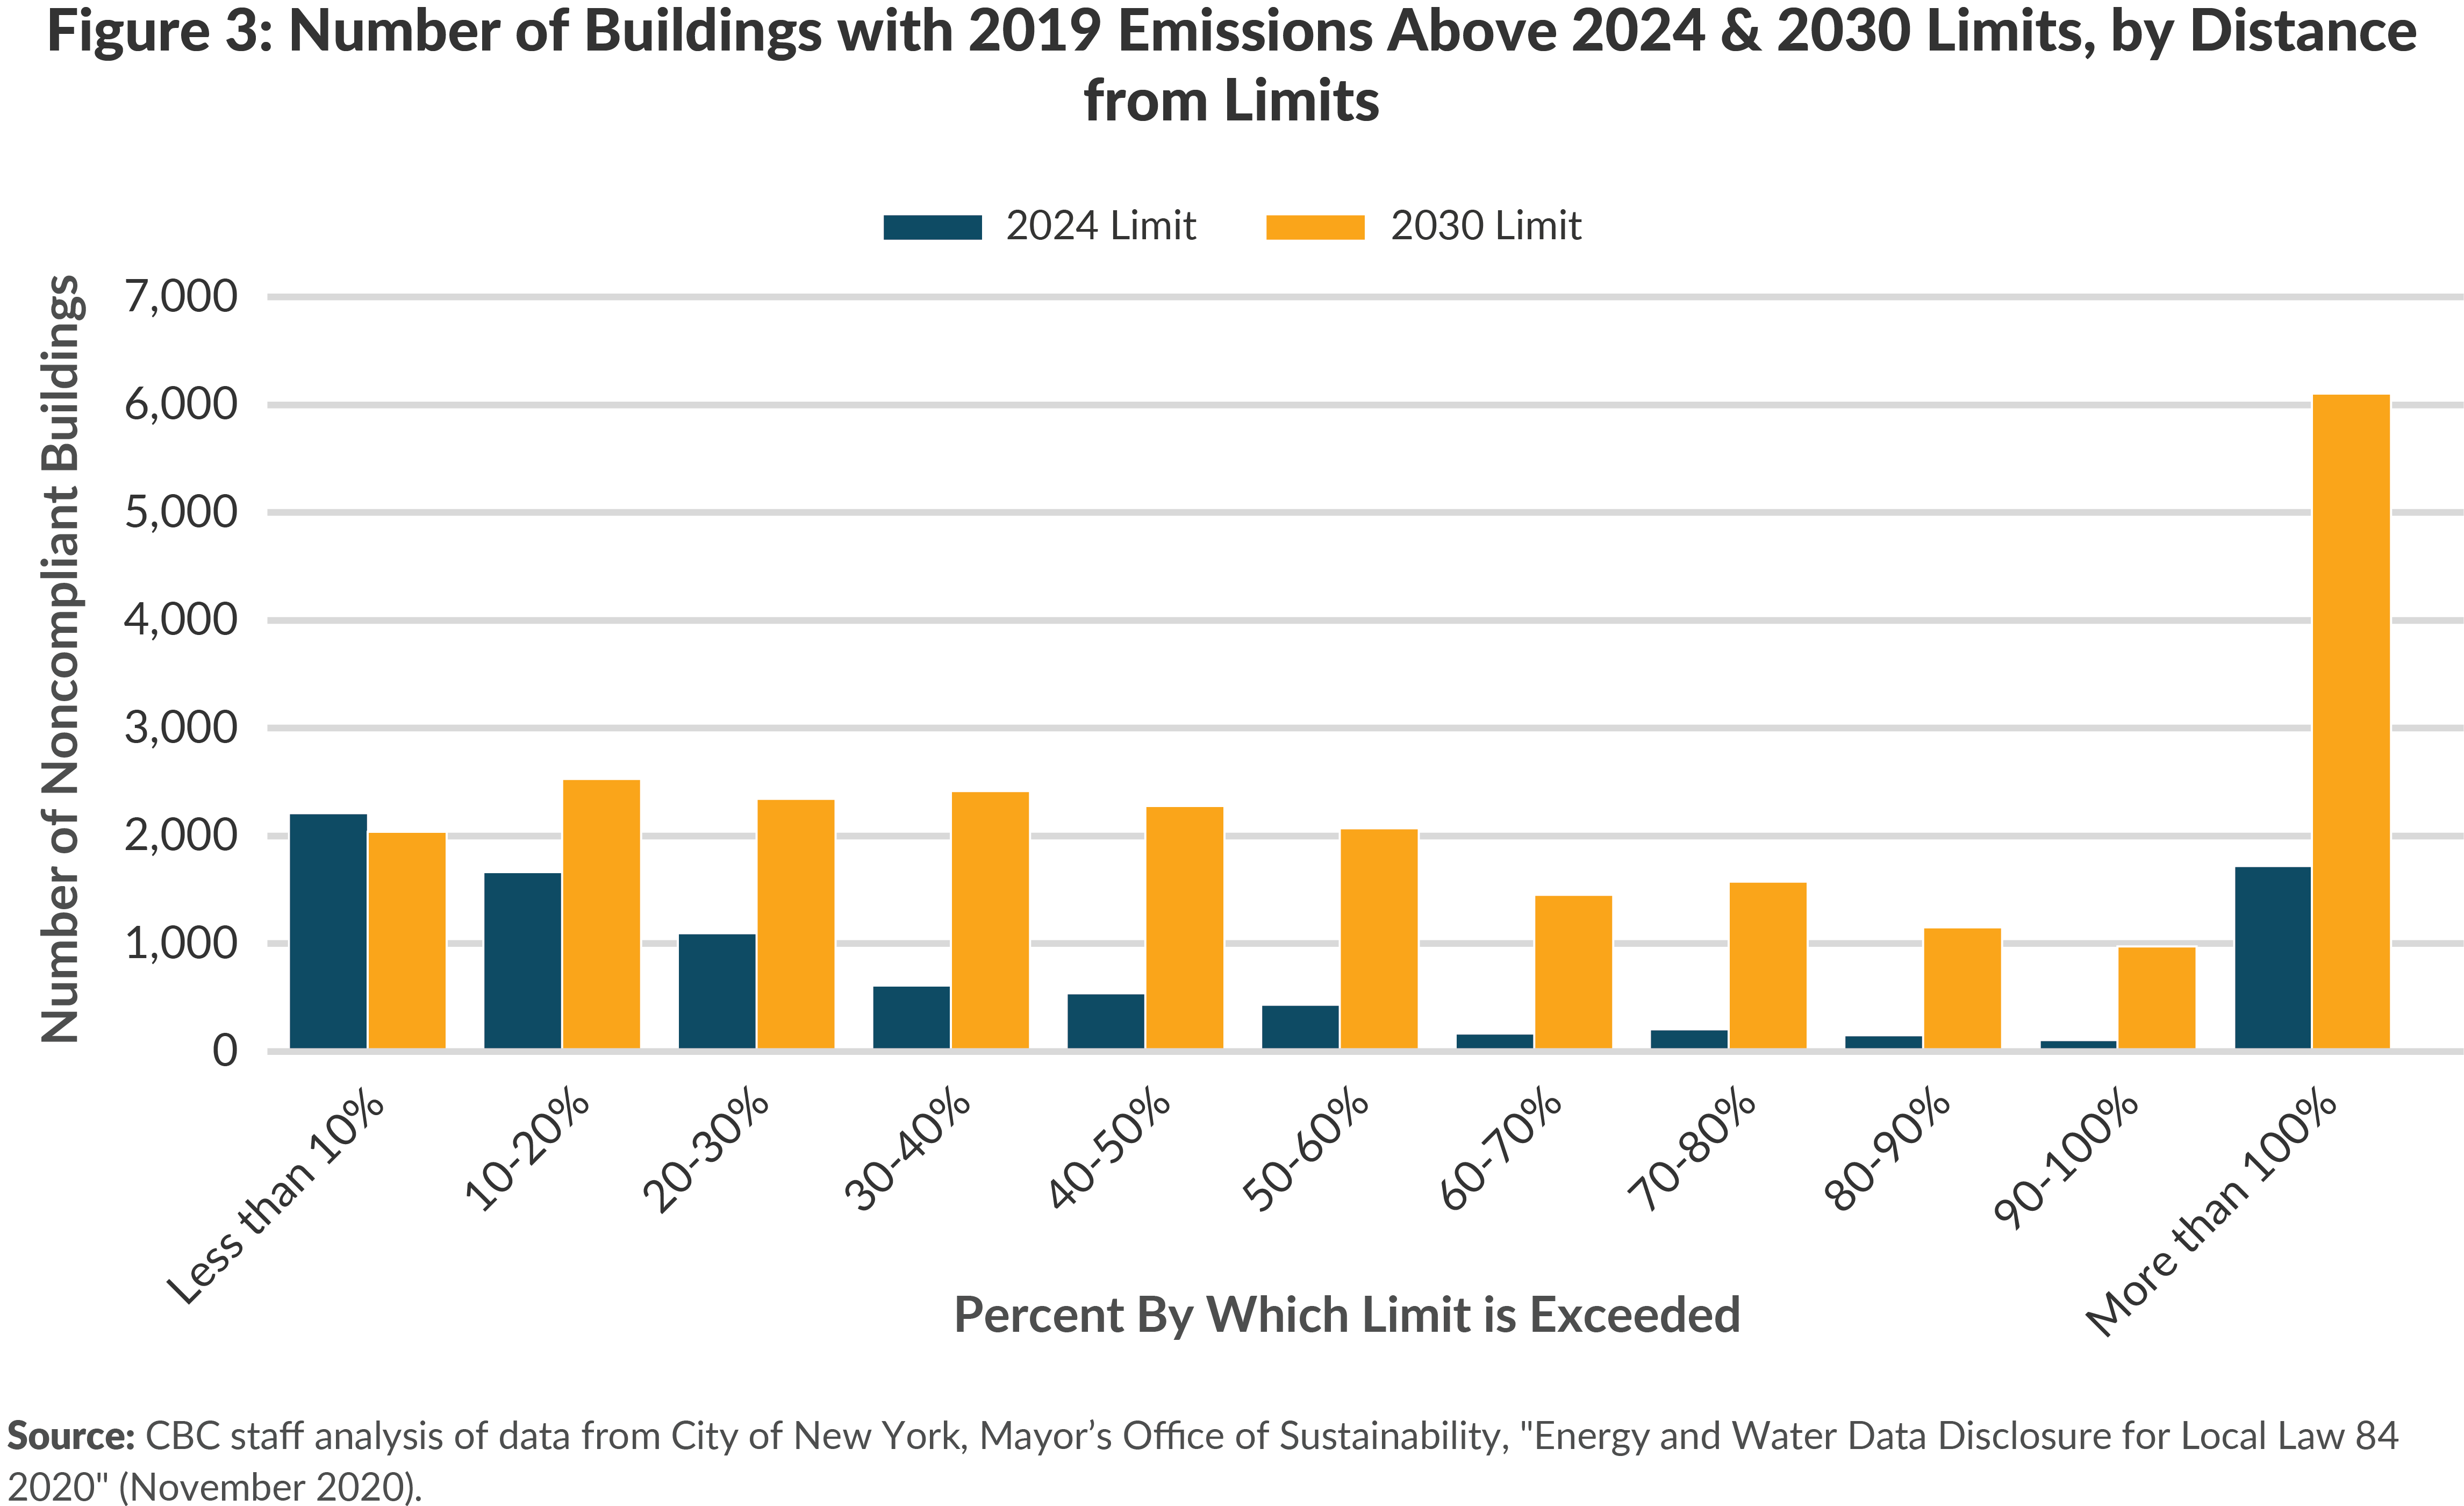 Figure 3. Number of Buildings with 2019 Emissions Above 2024 & 2030 Limits, by Distance from Limits